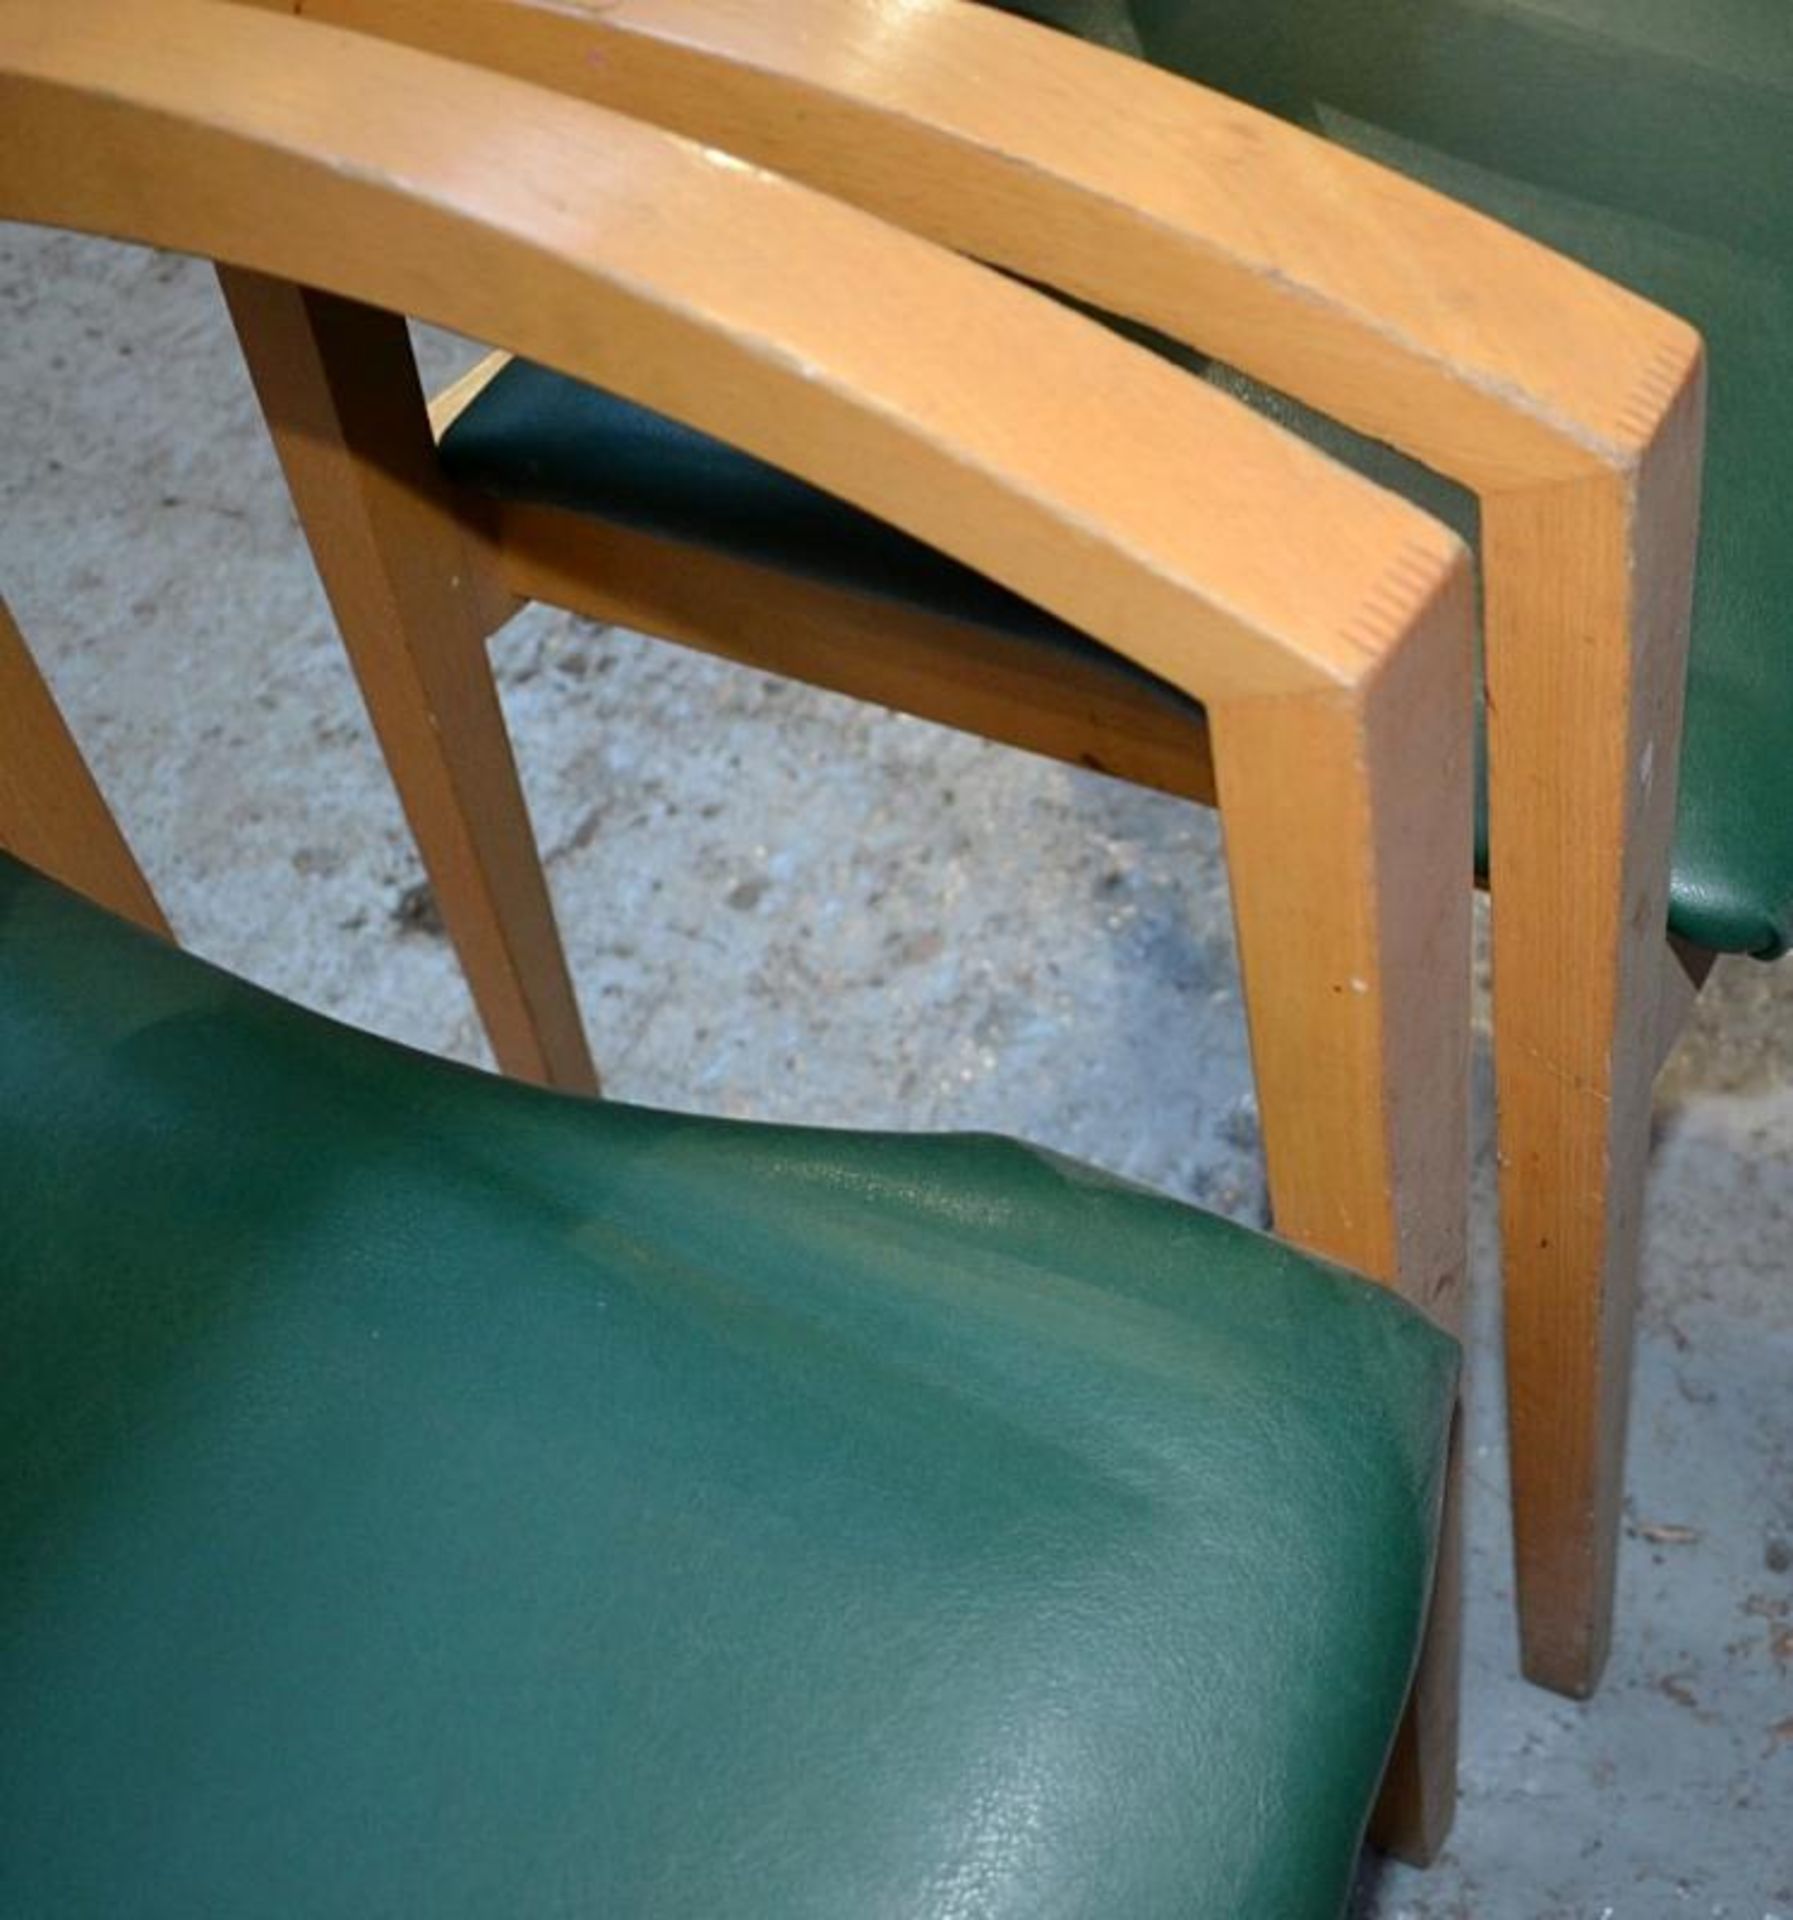 3 x Matching Wooden Chairs Upholstered Green Faux Leather - Dimensions: W57.5 x D50 x H86 x SH46cm - - Image 3 of 8